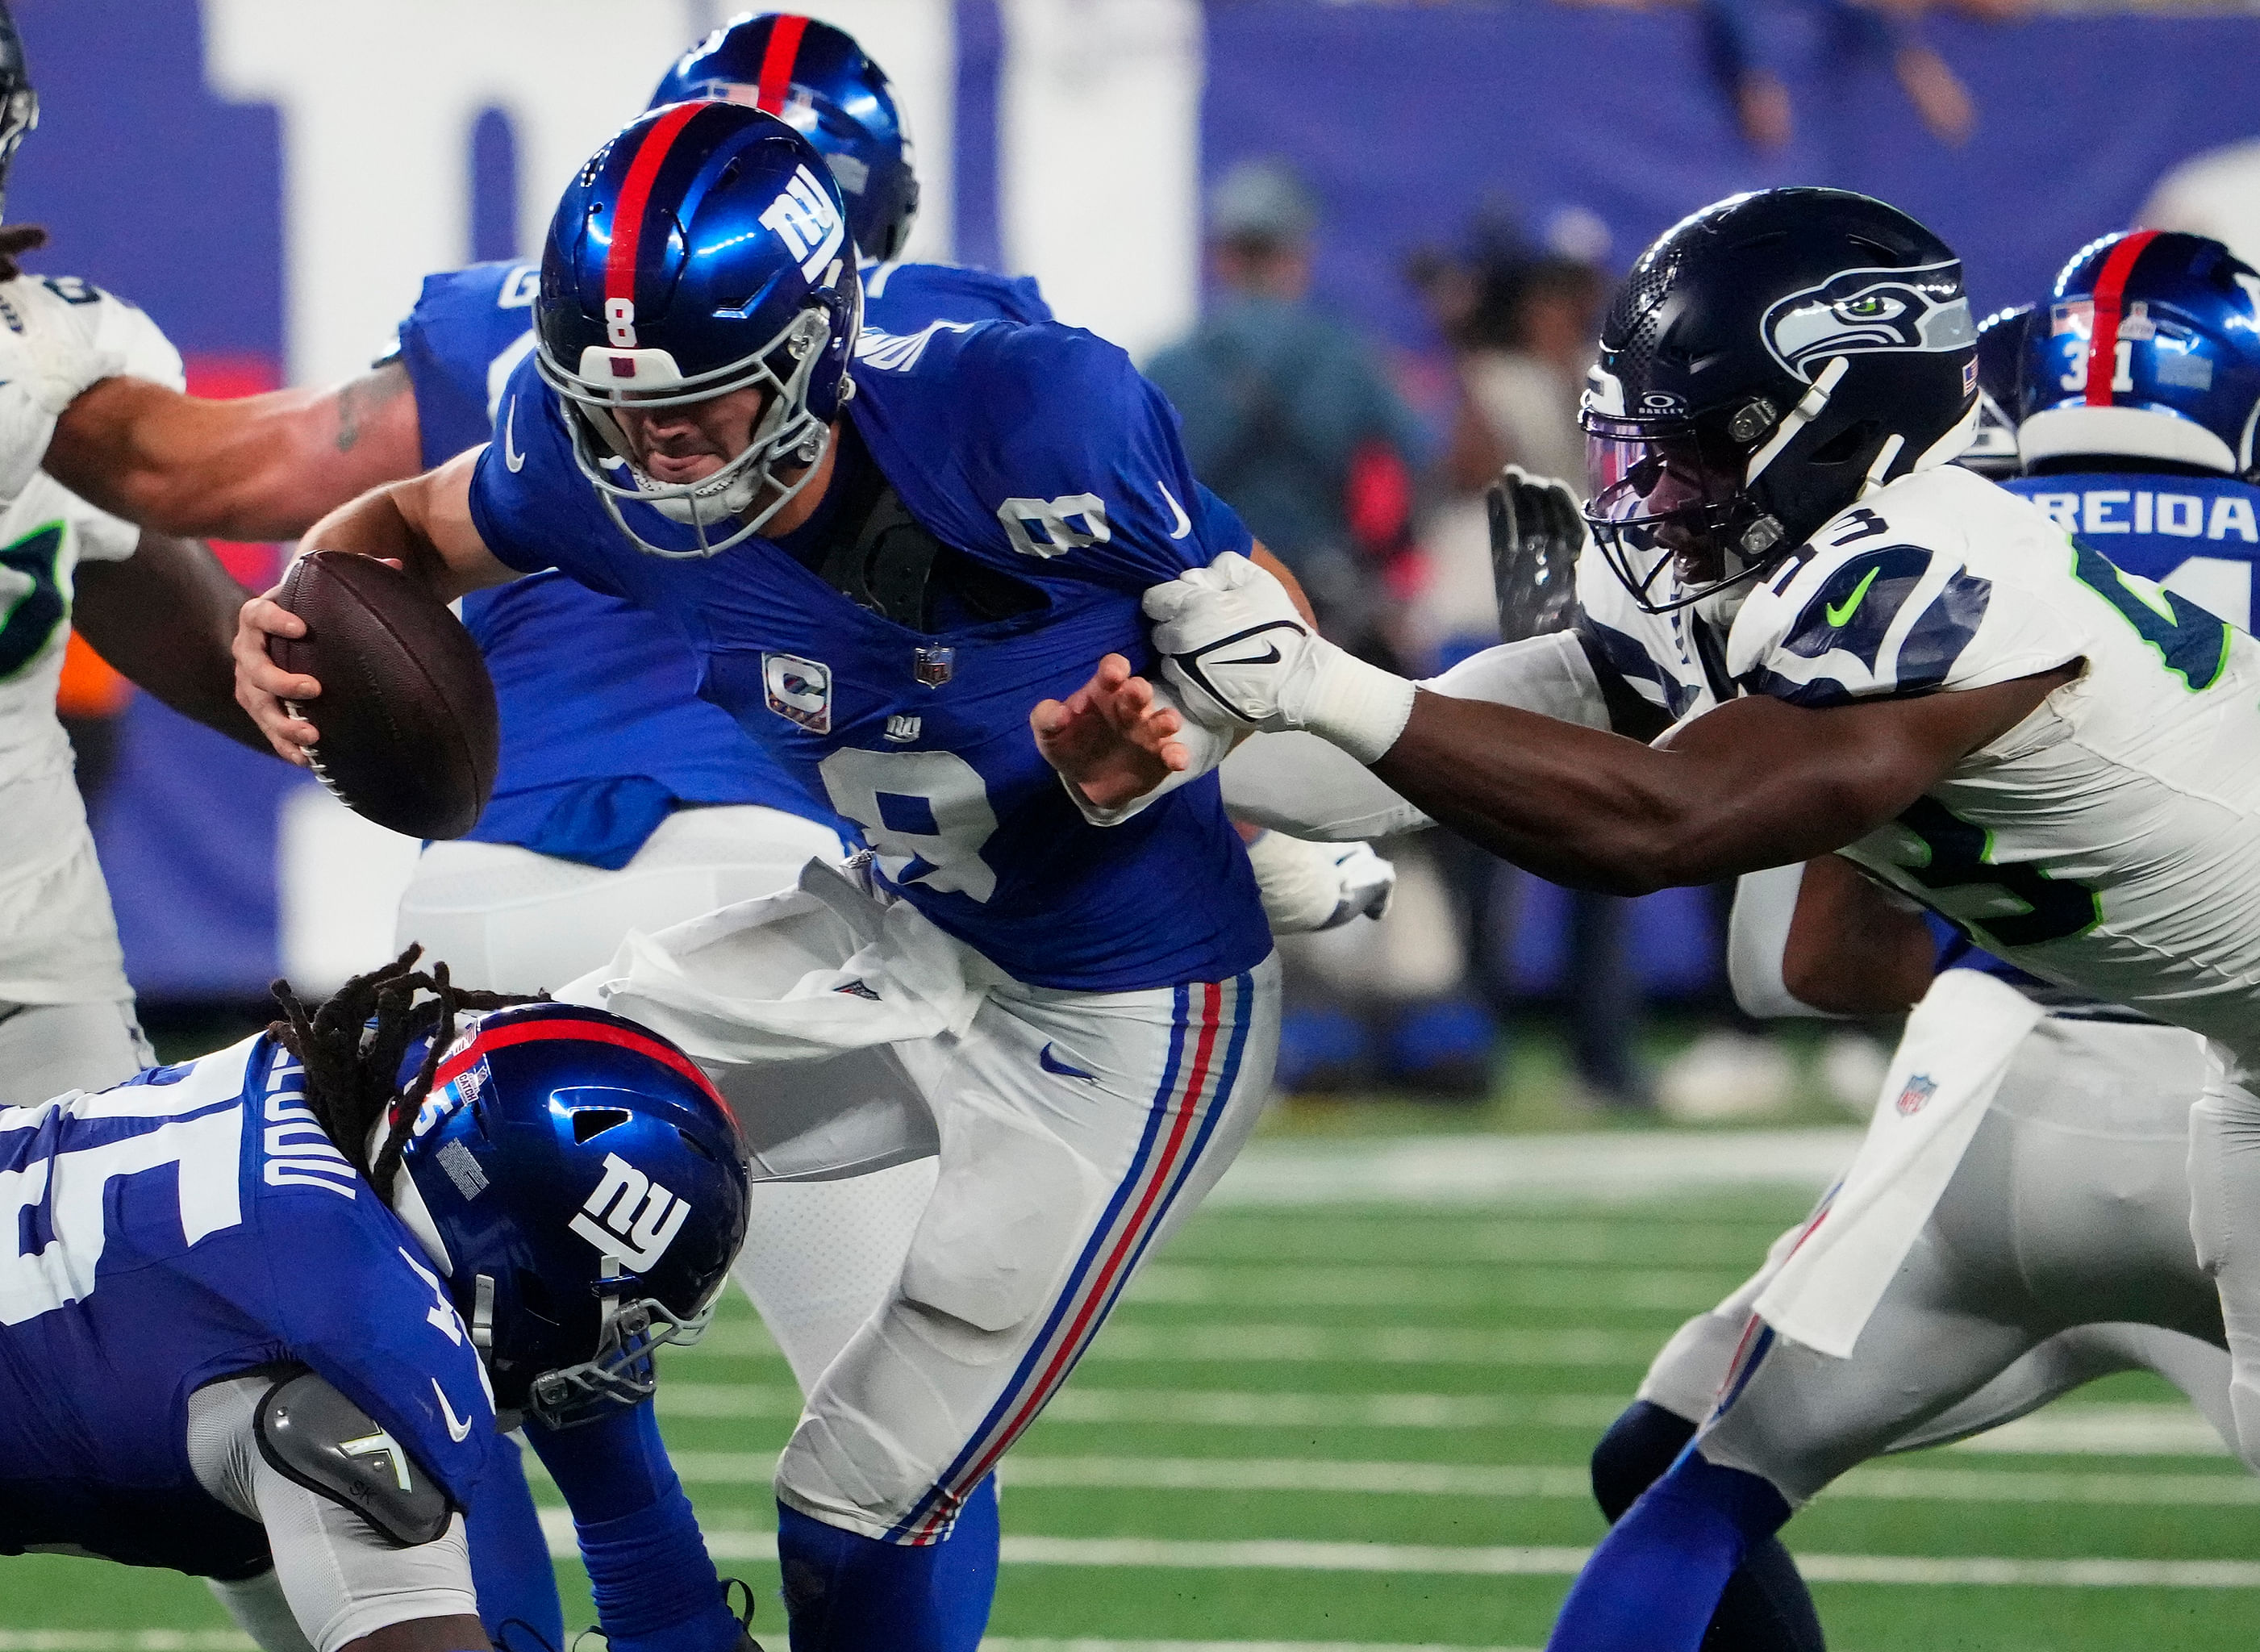 NFL: Seattle Seahawks at New York Giants (Image credit: IMAGN)